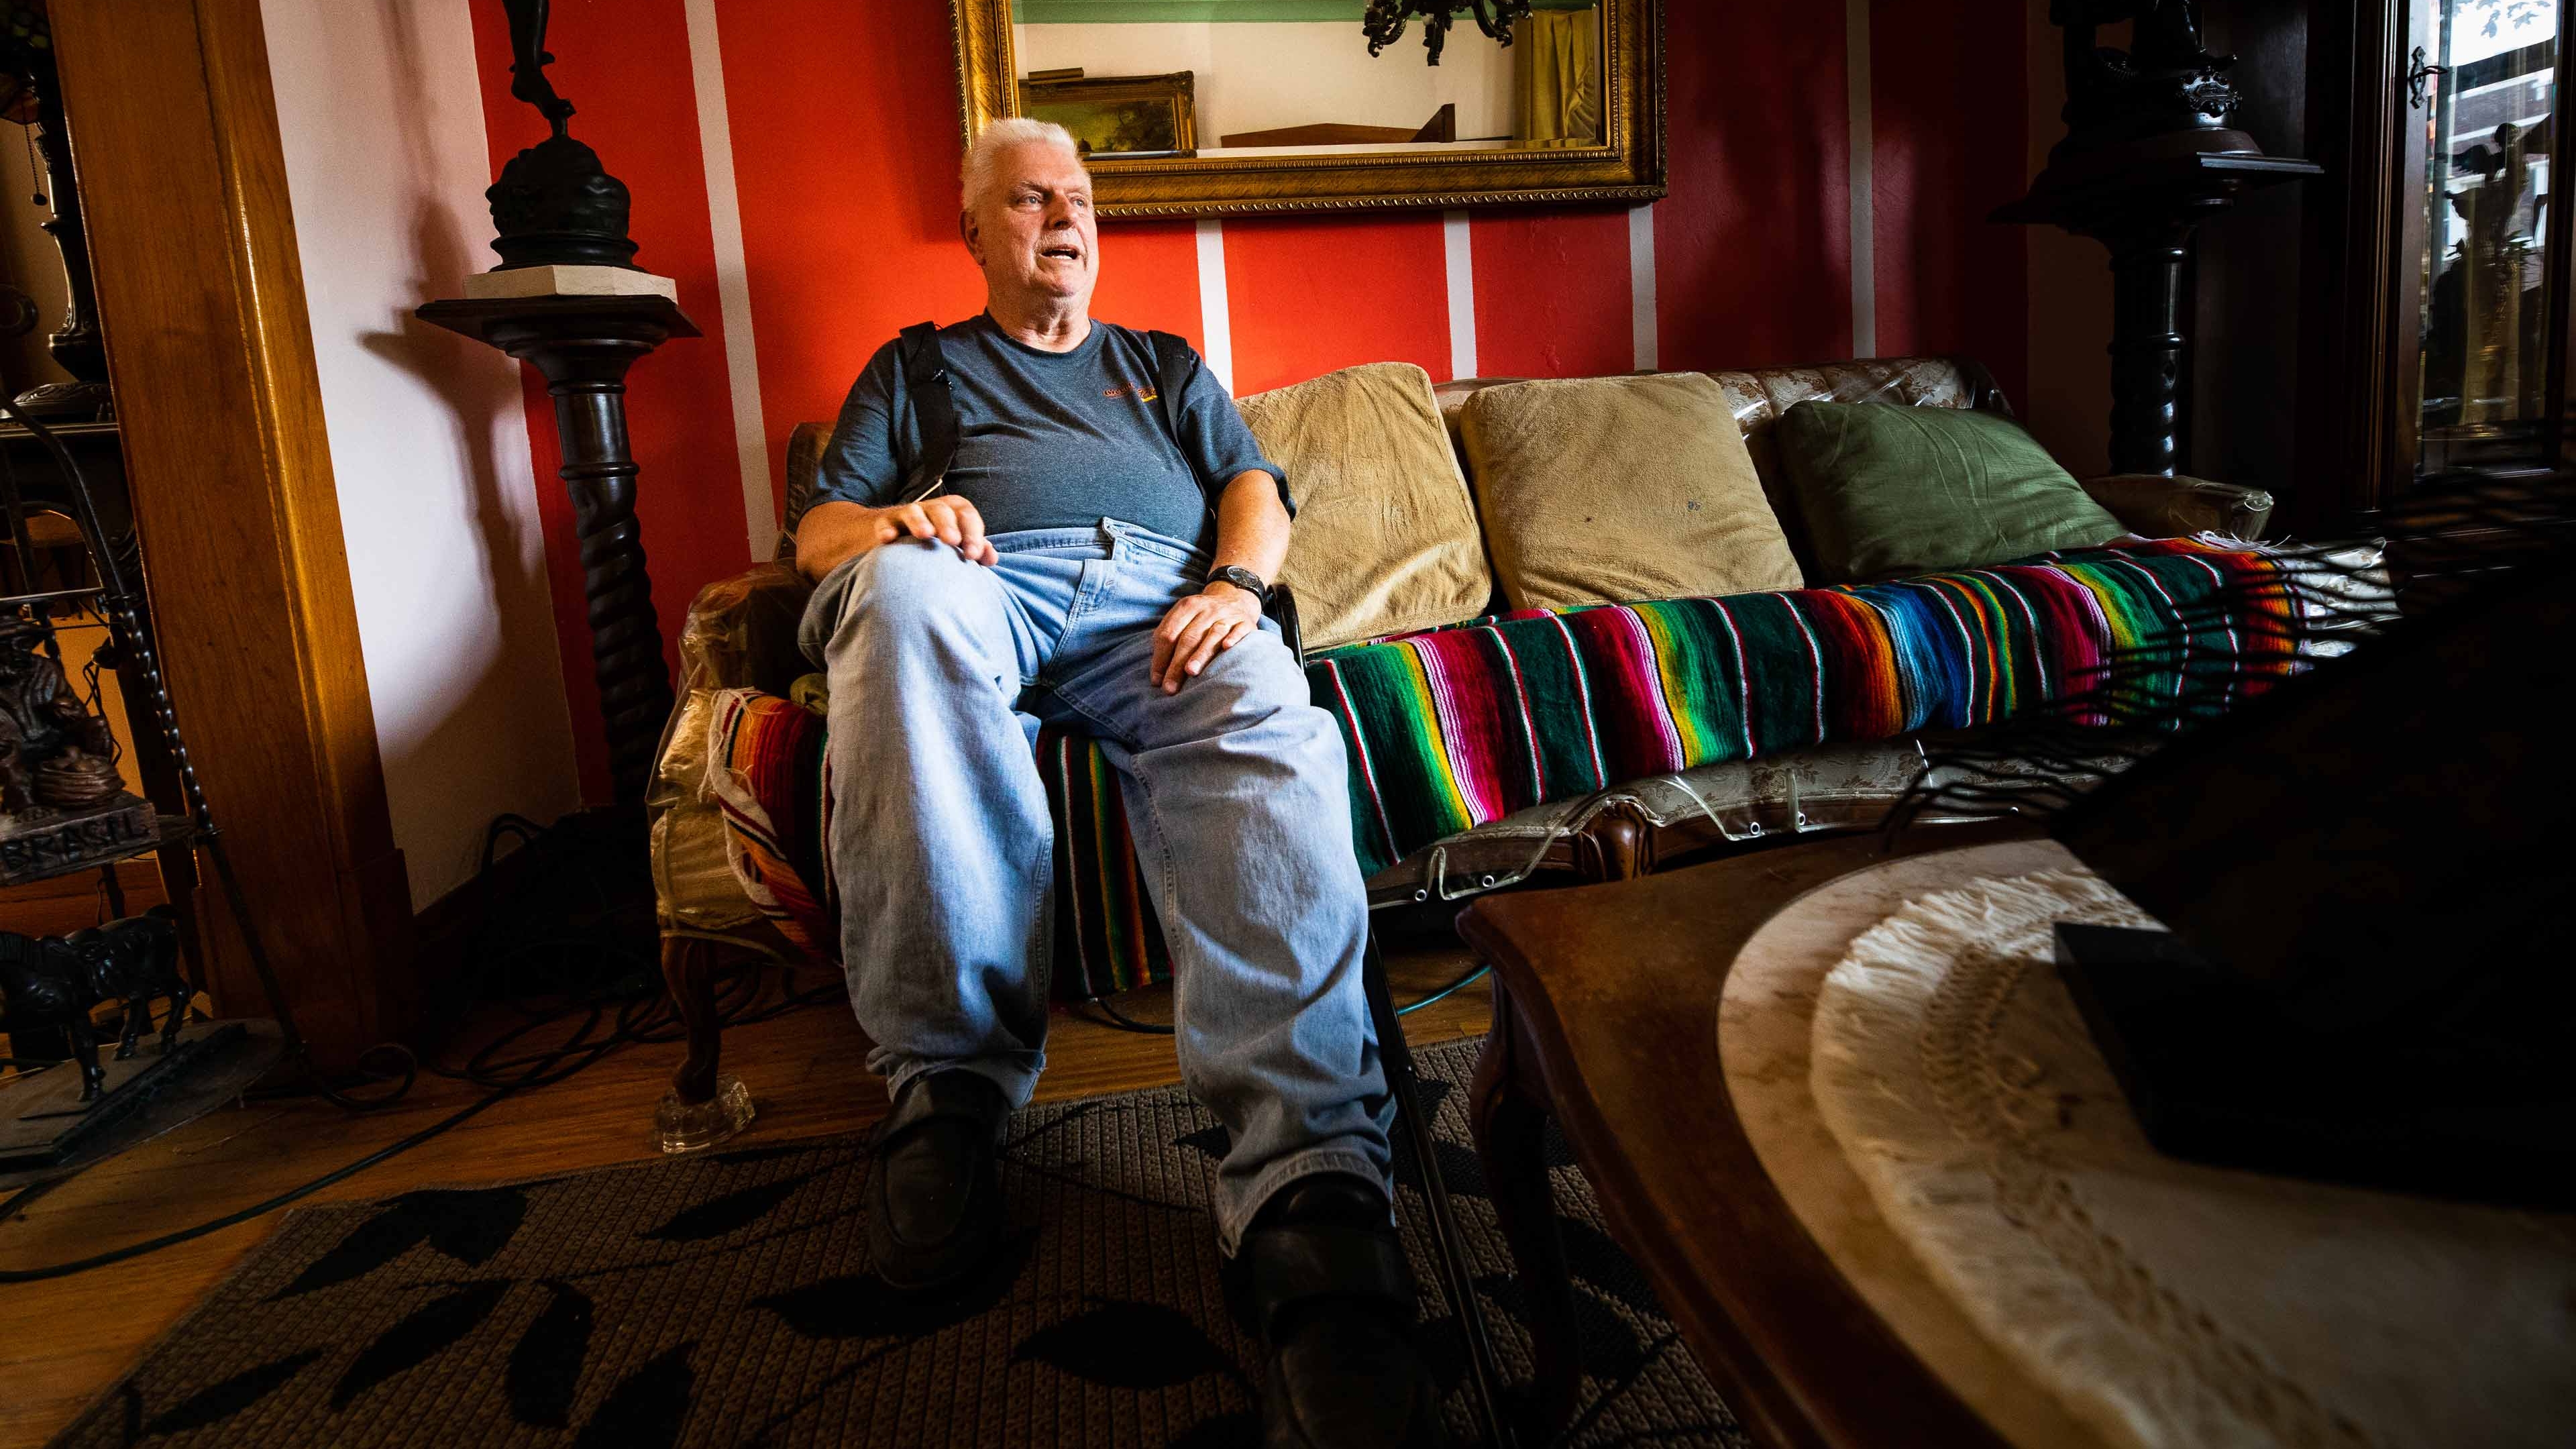 An elderly Cicero IL resident sits on the couch his colorful living room.